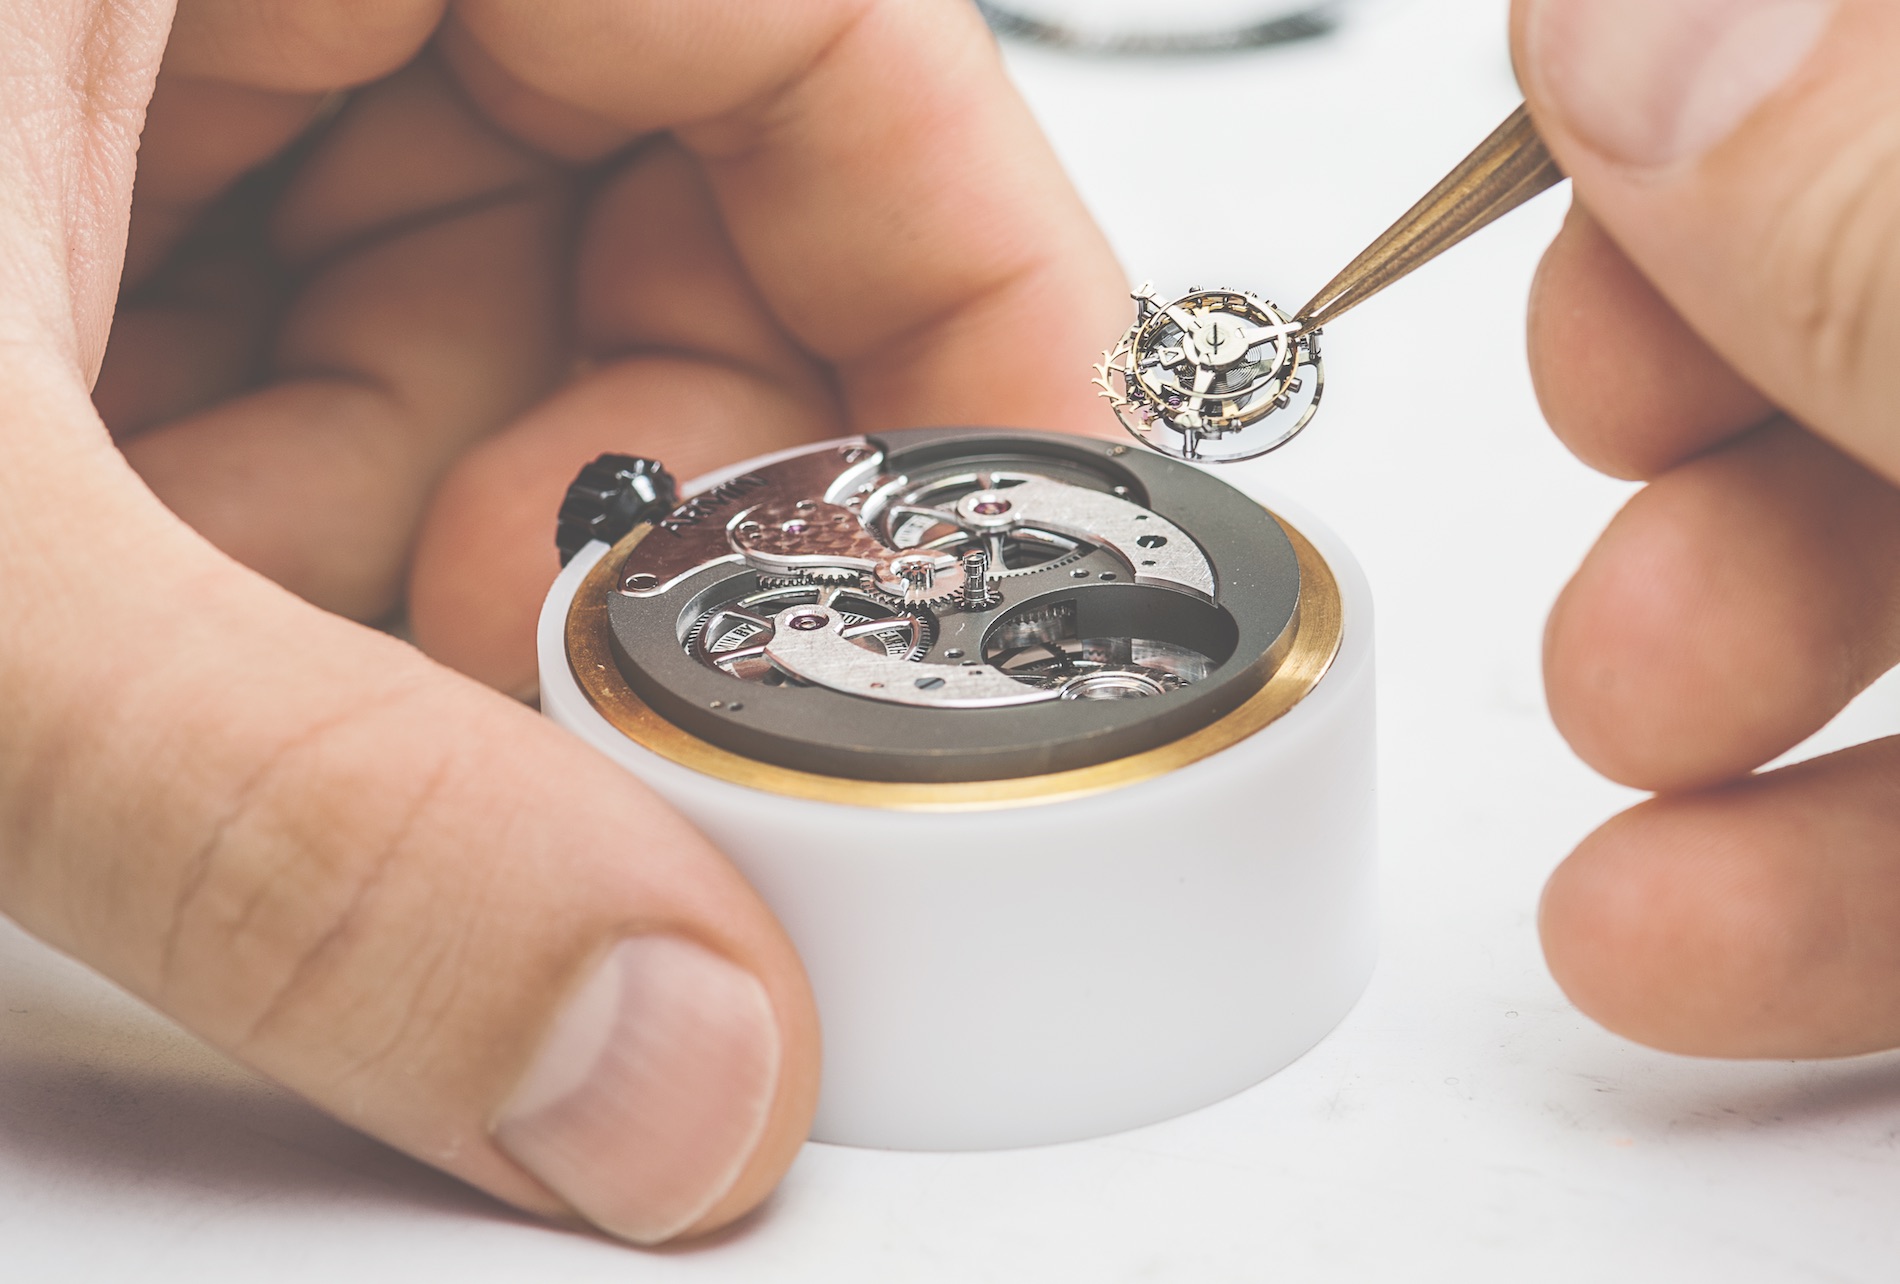 How An Armin Strom In-House Watch Movement Comes To Life